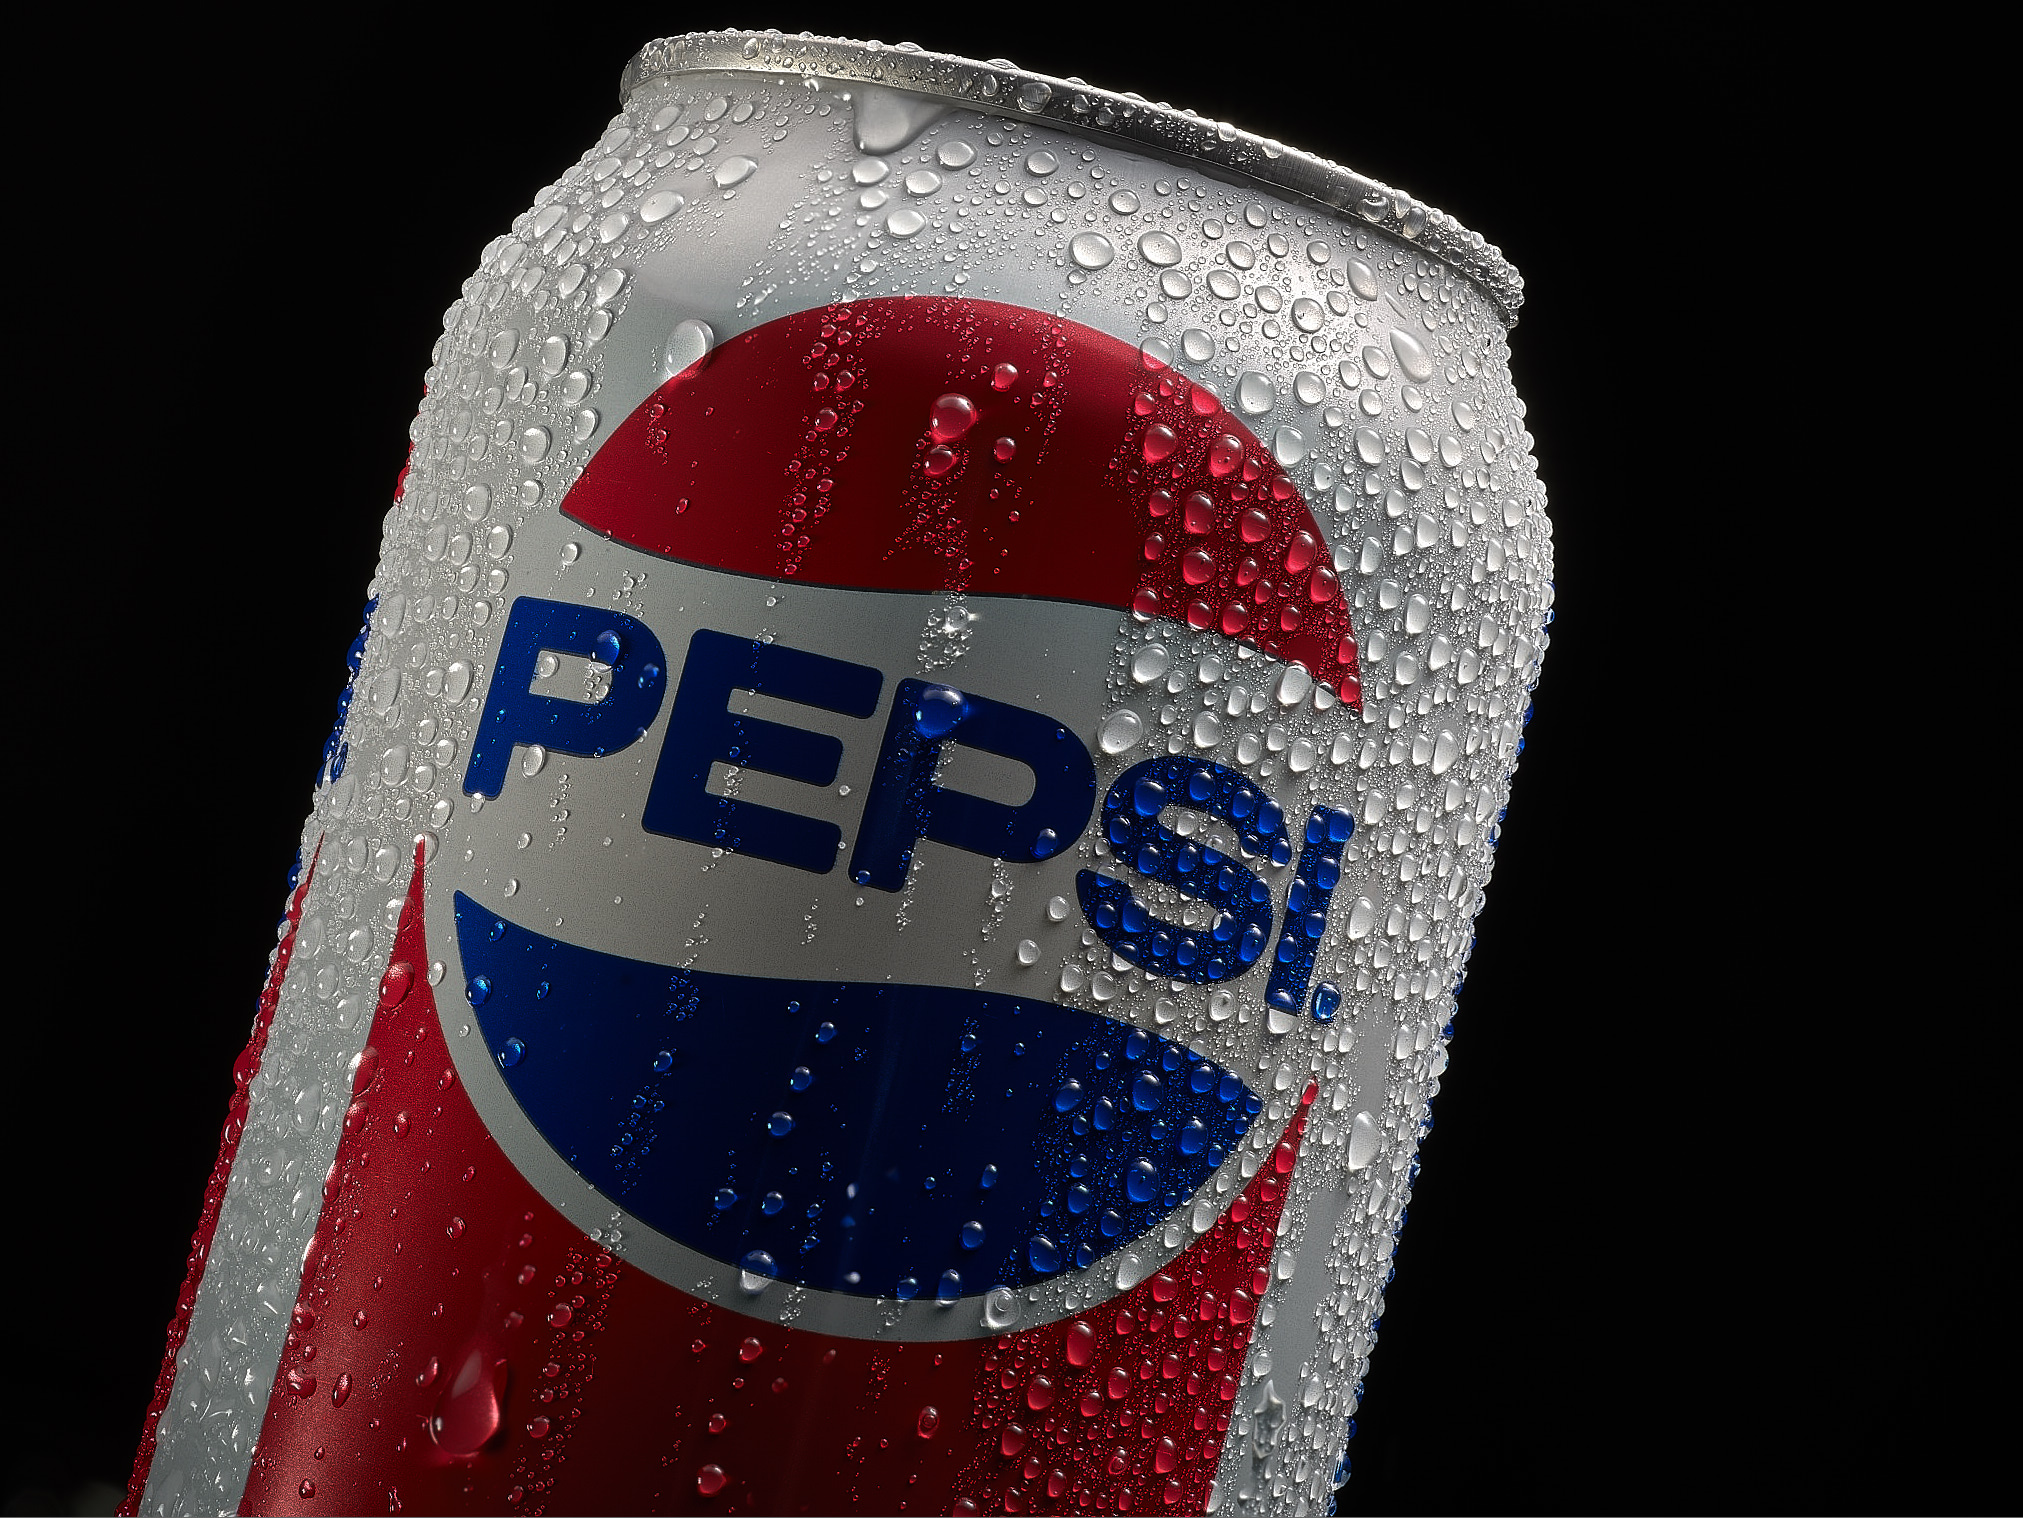 Water dripping down a cold refreshing Pepsi can On a black background With closer detail